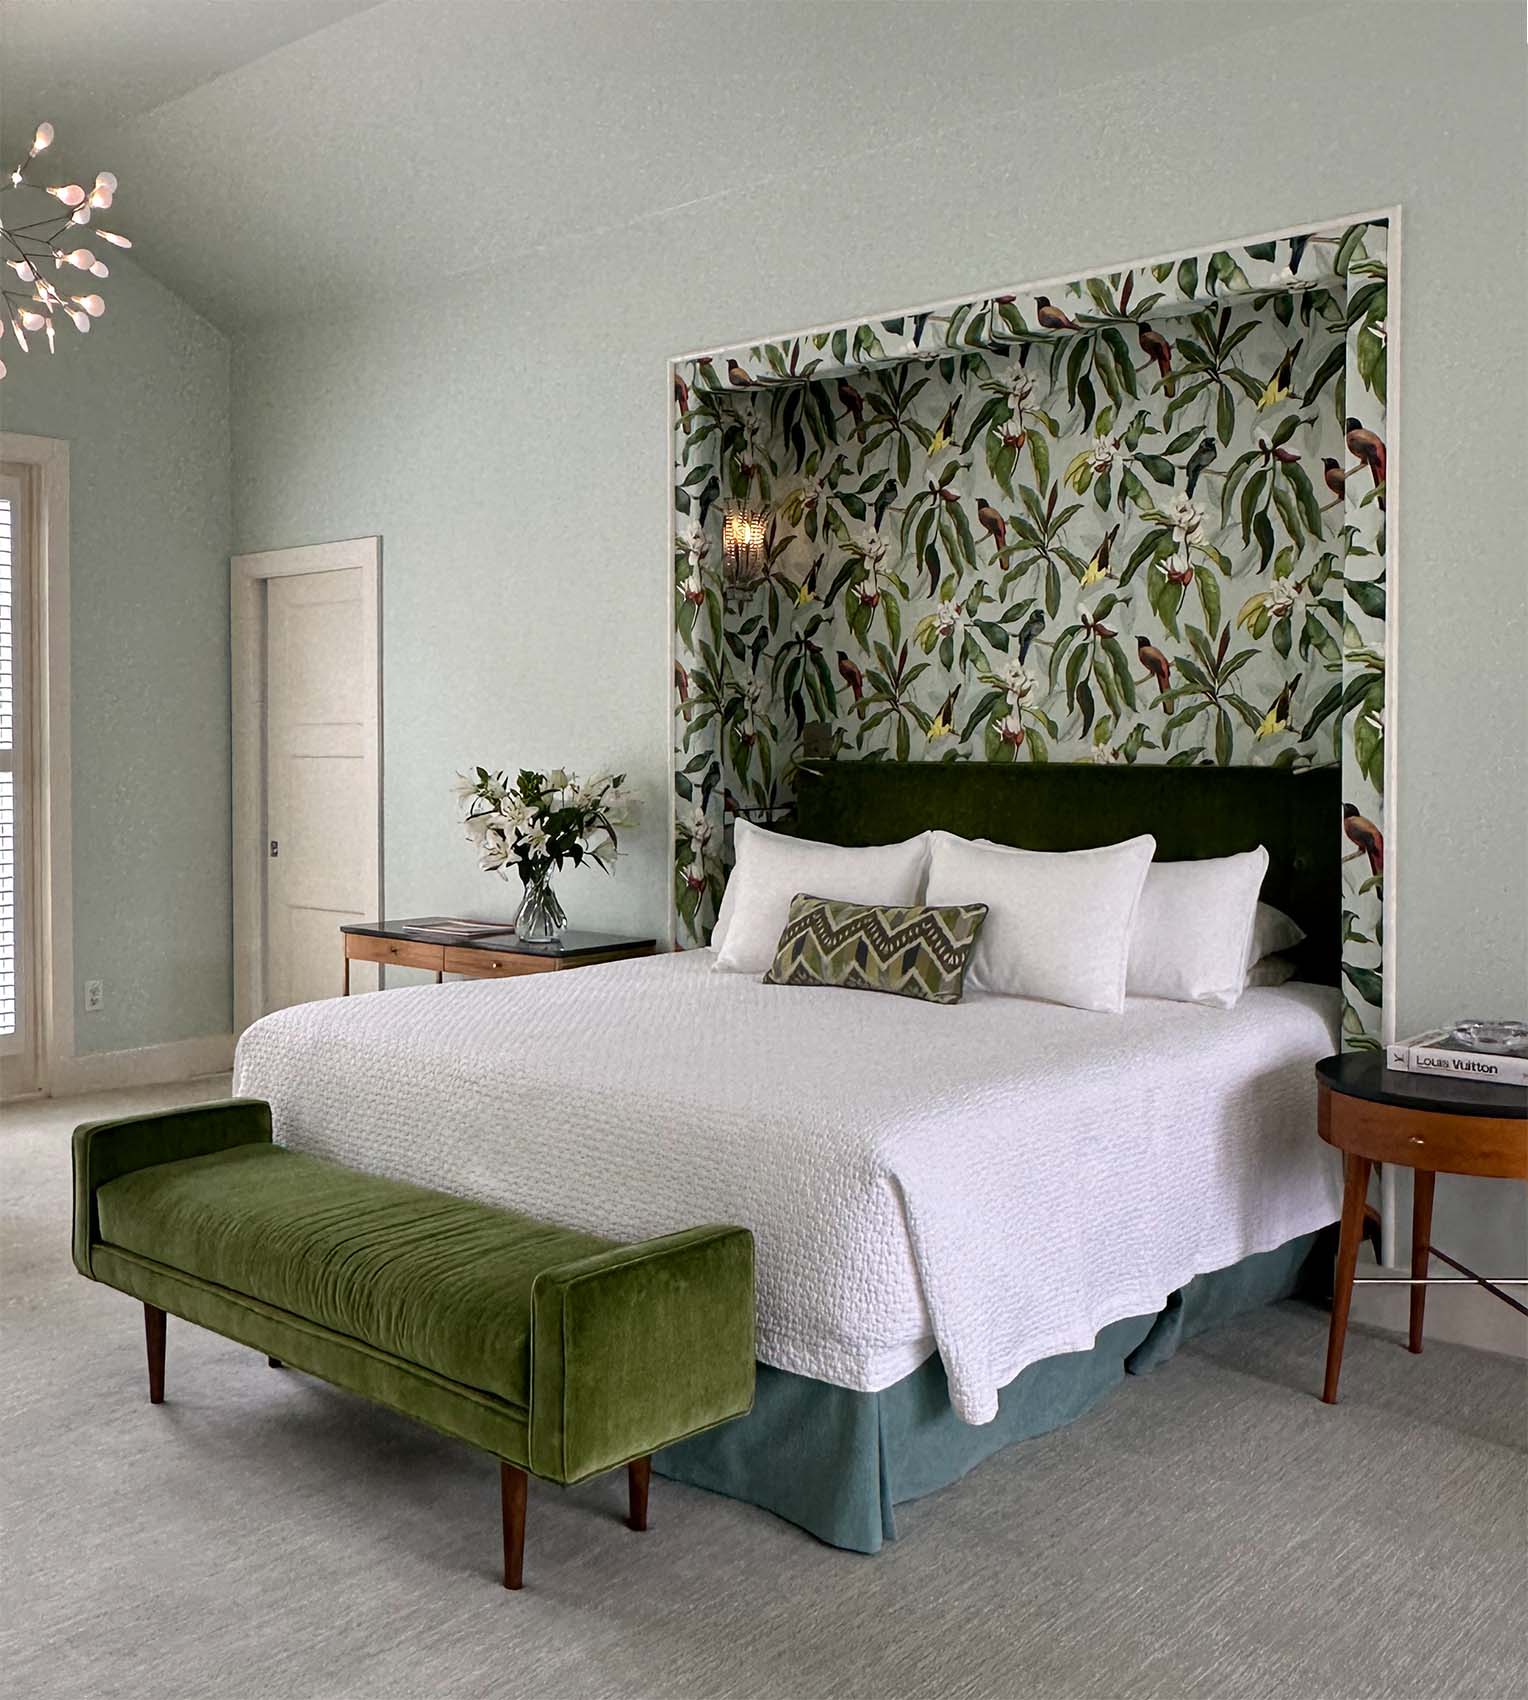 wallpapered-guest-bedroom-niche-in-osborne-and-little-michelia